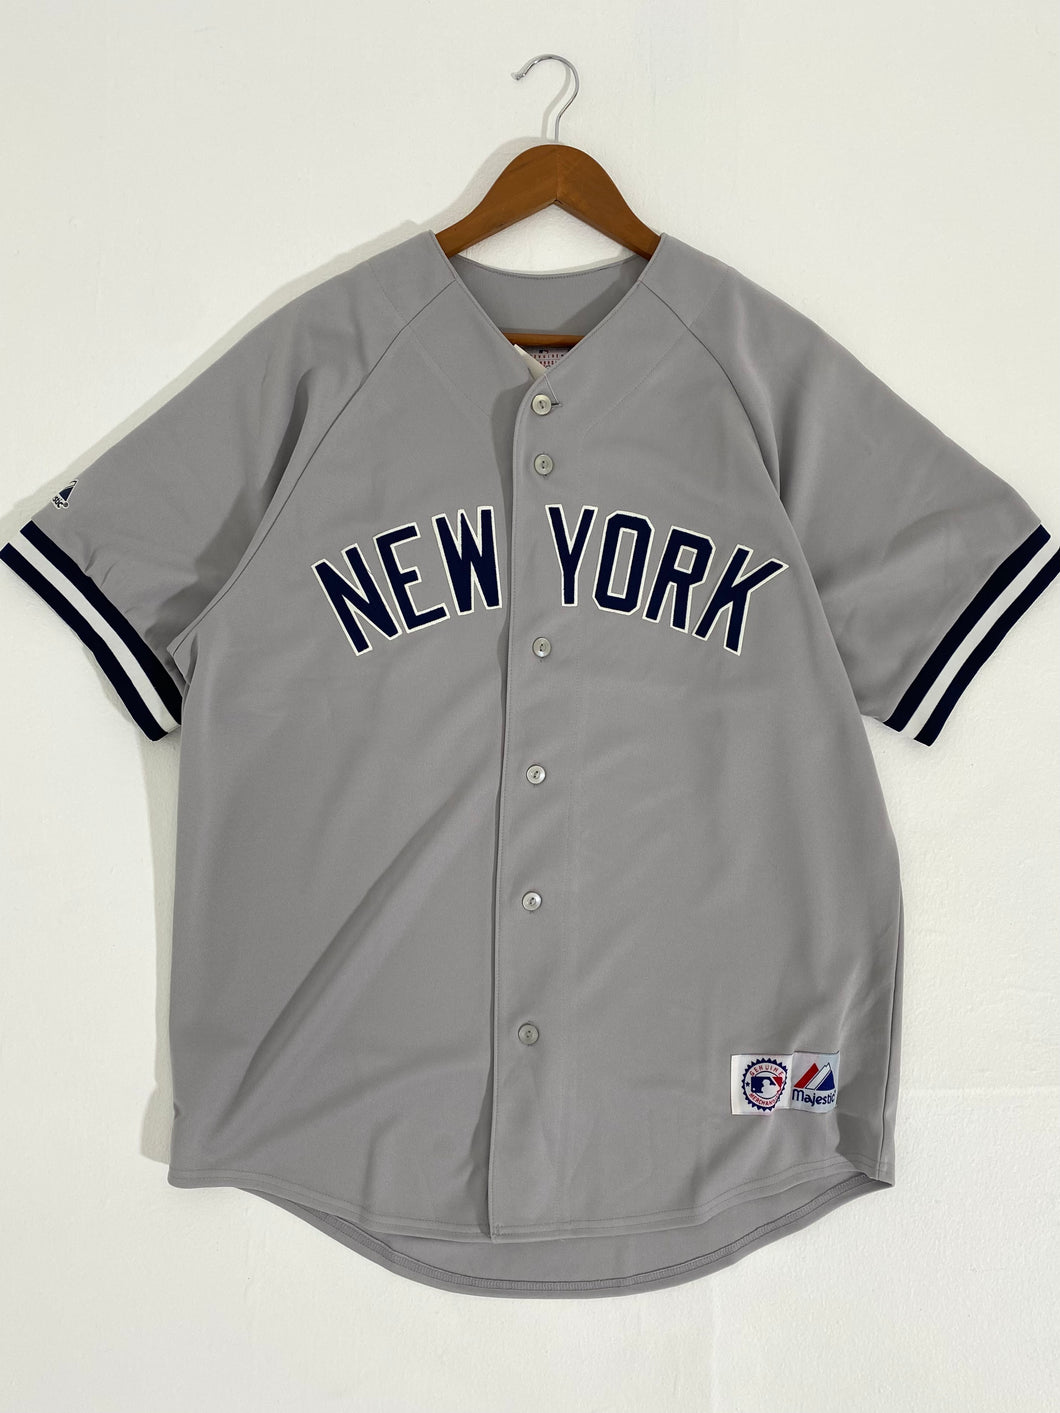 2005-08 NEW YORK YANKEES MATSUI #55 MAJESTIC JERSEY (HOME) Y